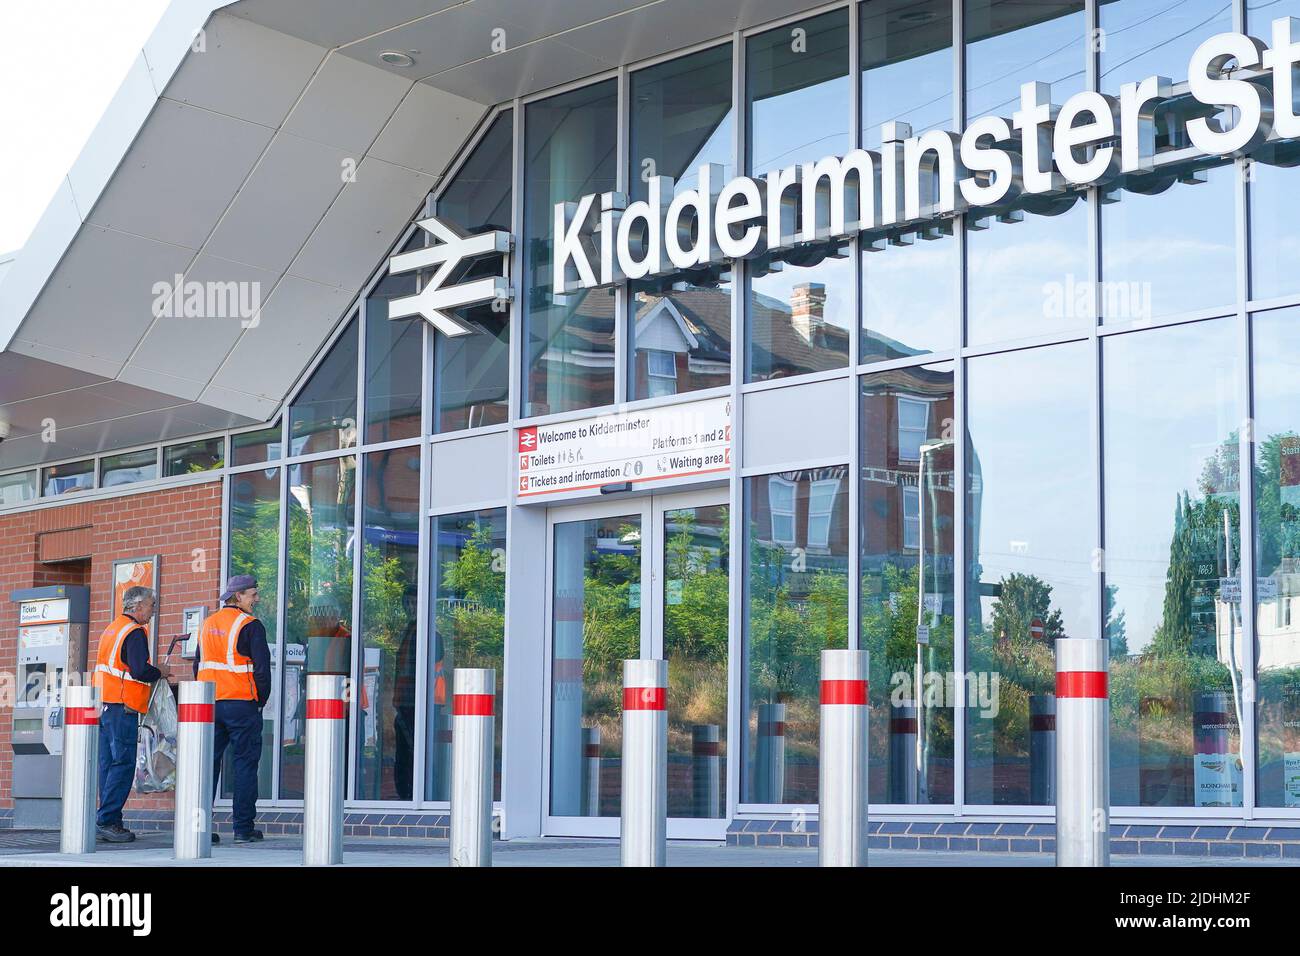 Kidderminster, UK. 21st June, 2022. Today's National Rail strike has left rail stations deserted. Early morning commuters are missing from this Midlands station today, leaving only cleaning contractors emptying rubbish from the previous day's commuters. Credit: Lee Hudson/Alamy Live News Stock Photo